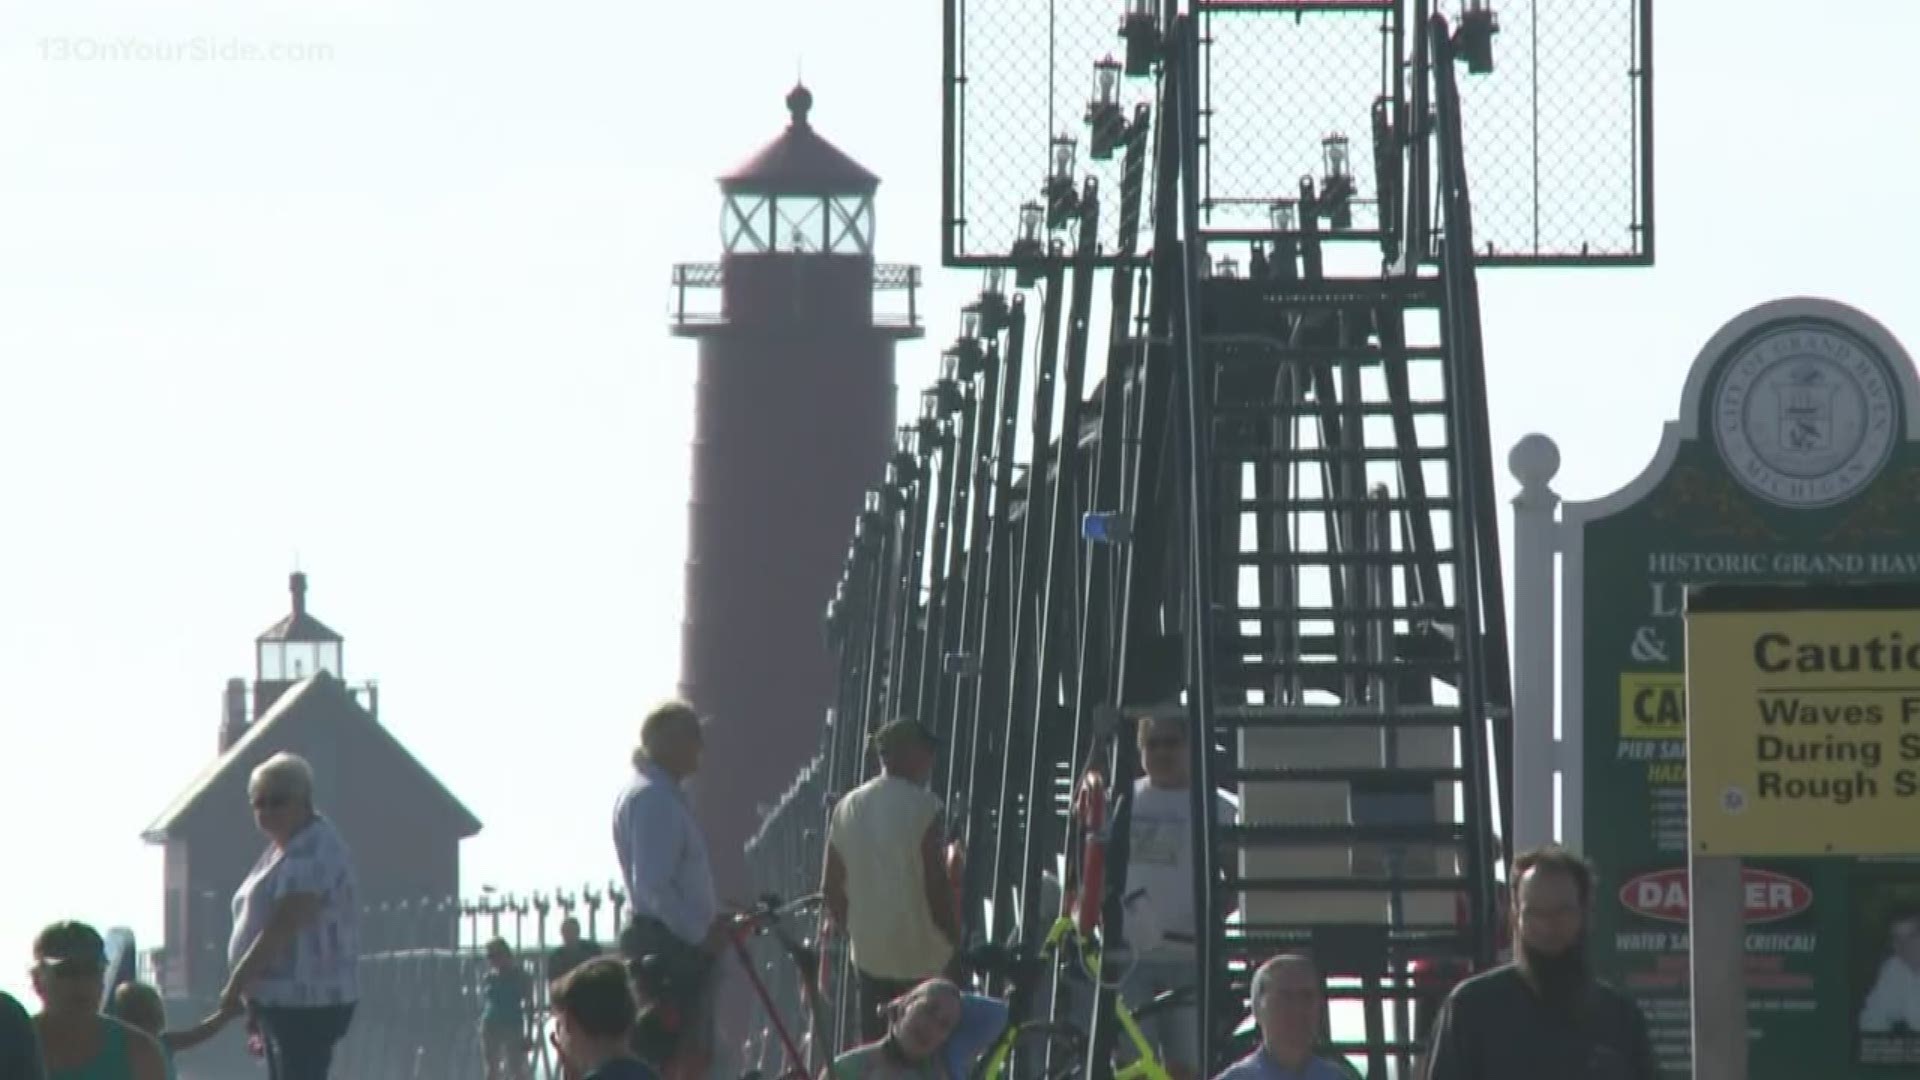 It's been three years since the Grand Haven catwalk has been illuminated. A celebration is being held on Monday night.